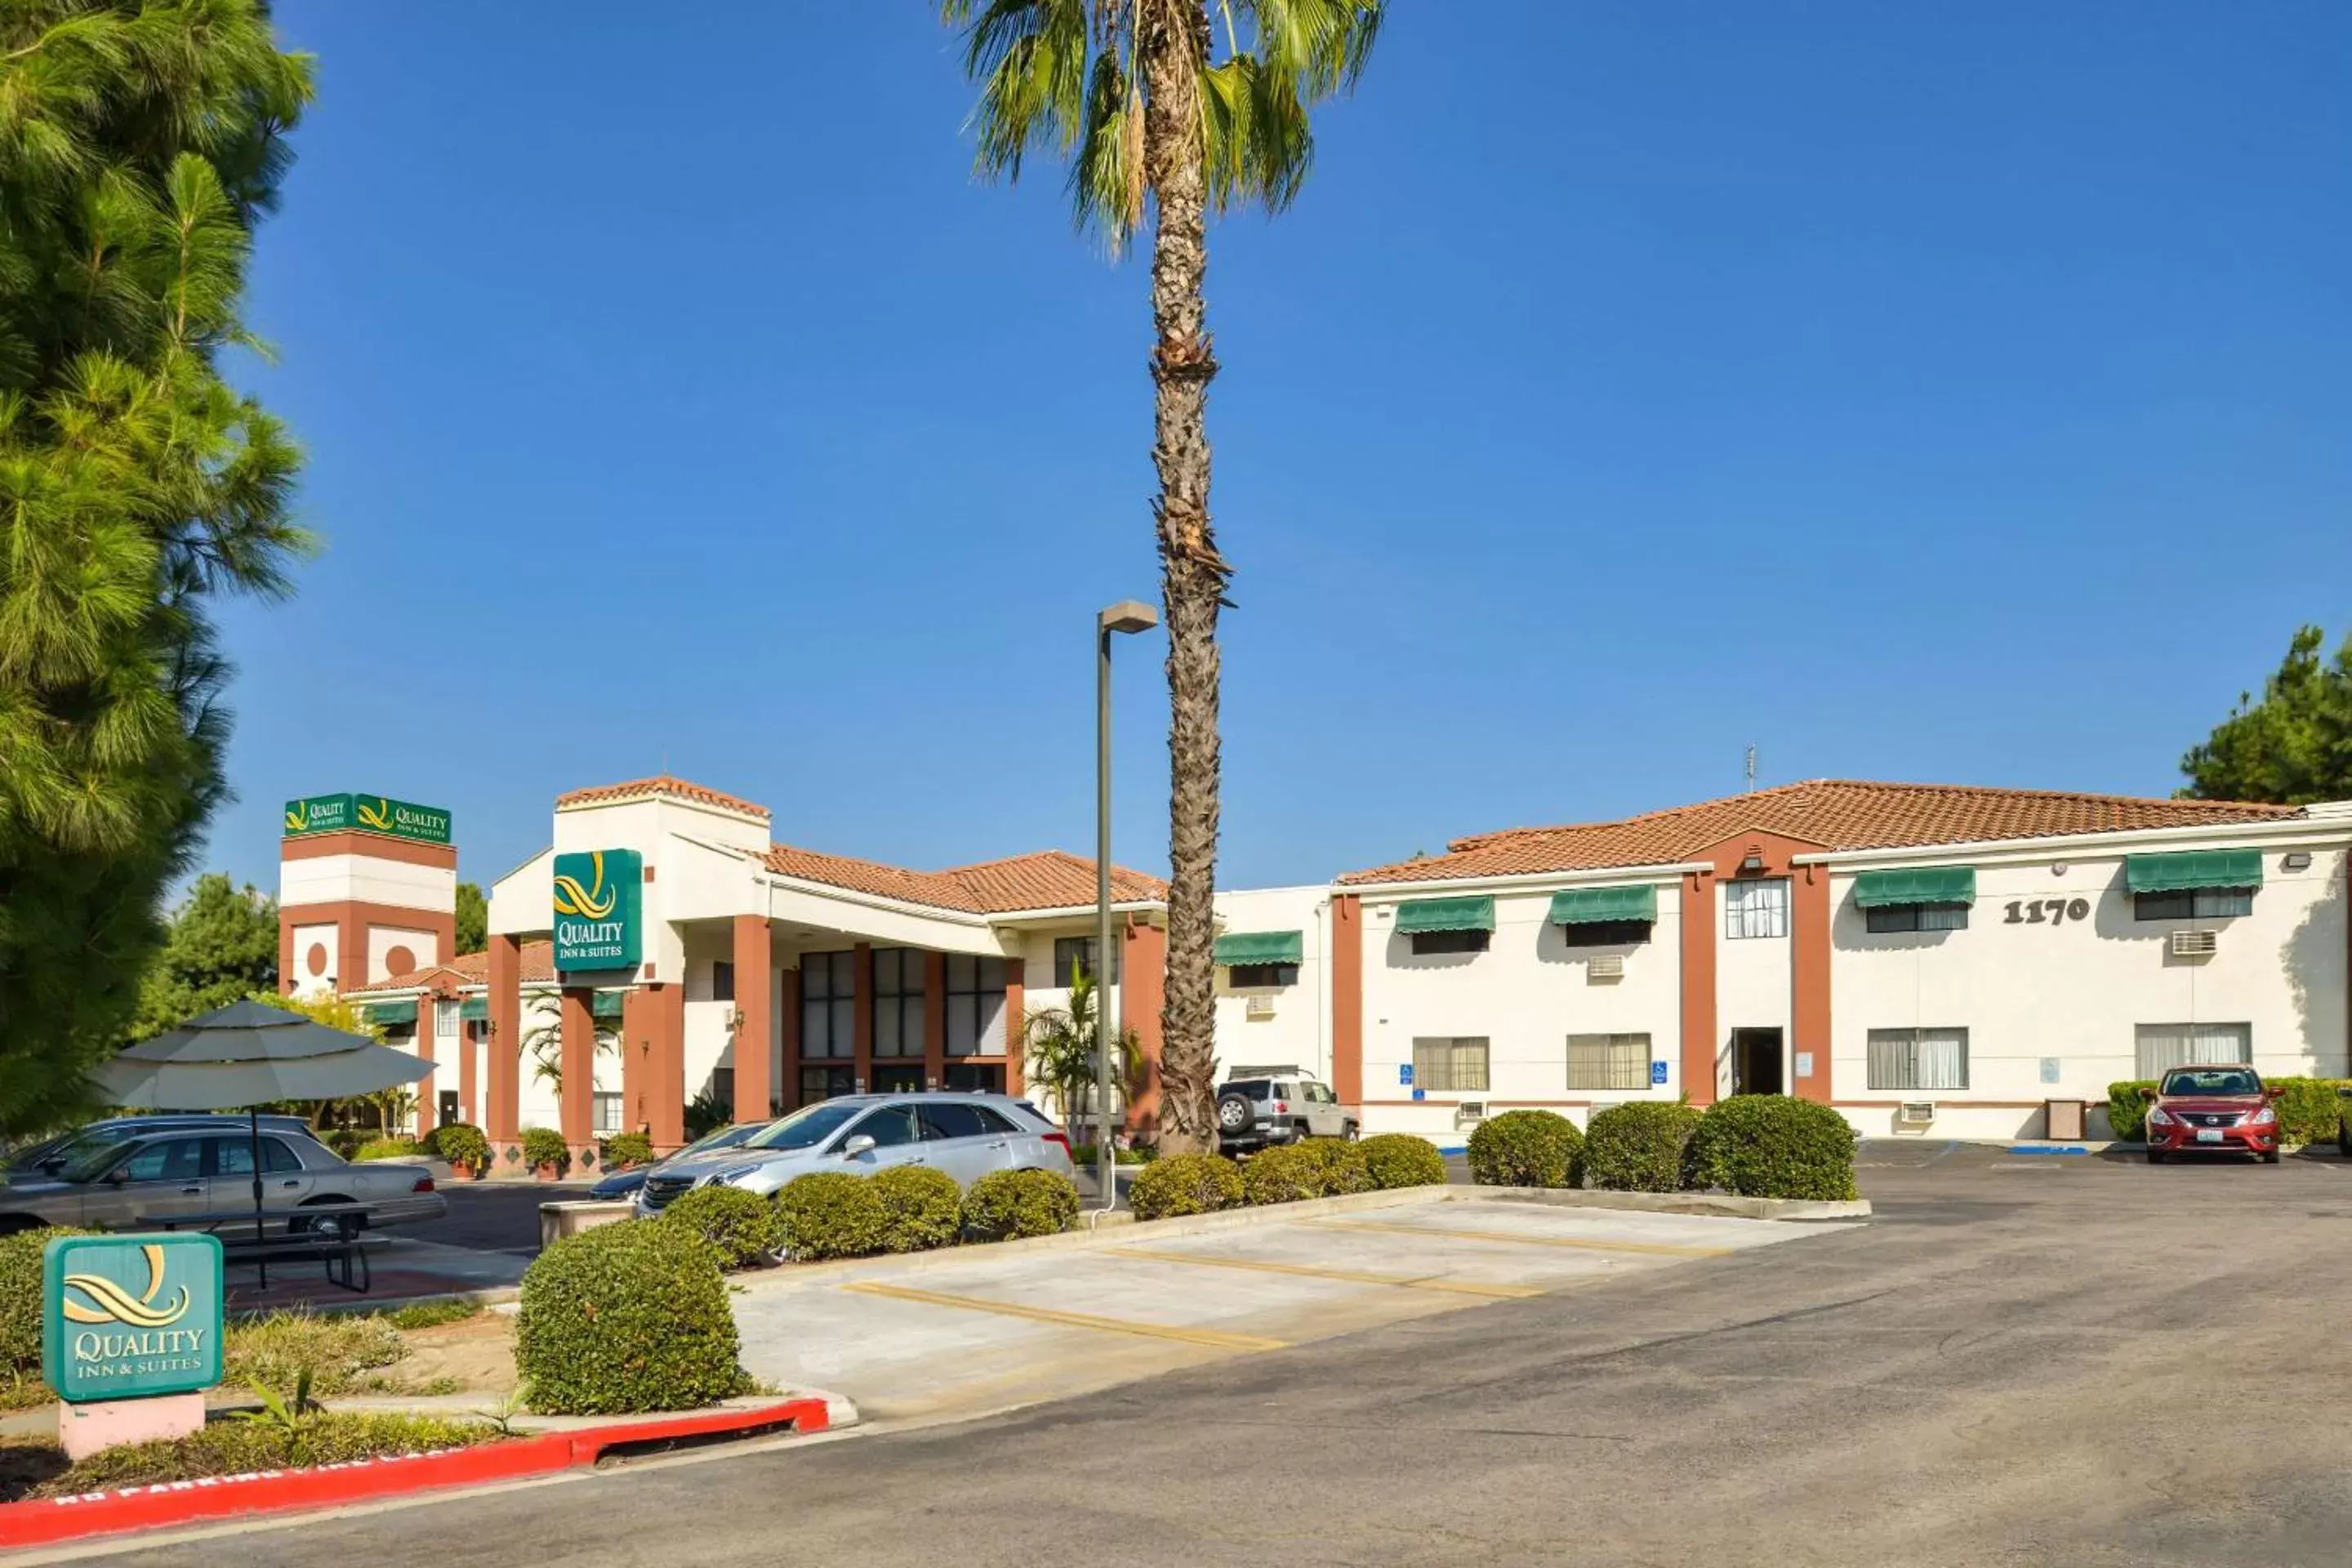 Property Building in Quality Inn & Suites Walnut - City of Industry